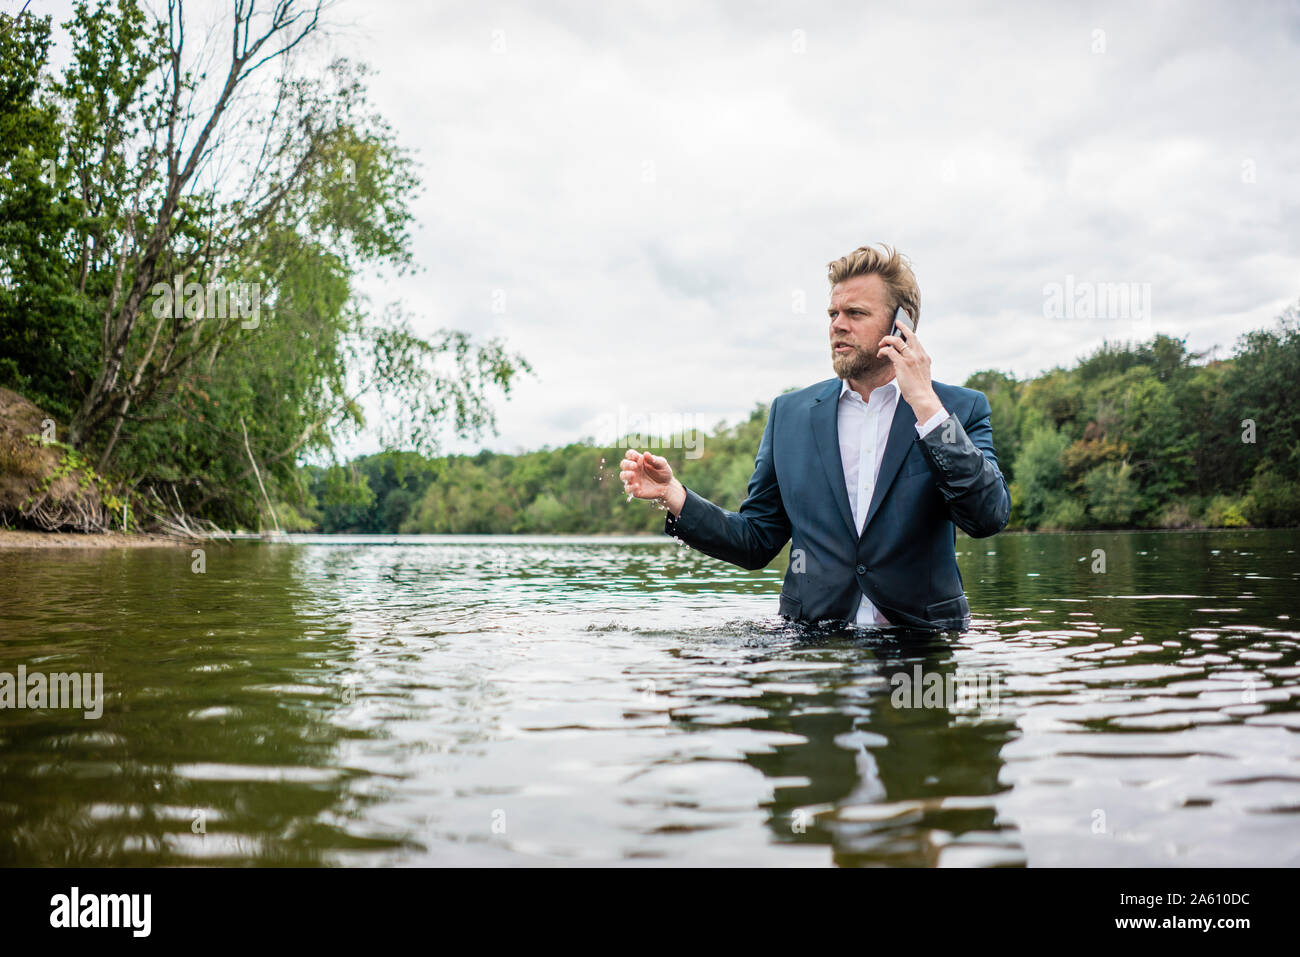 Businessman standing in a lake talking on the phone Stock Photo